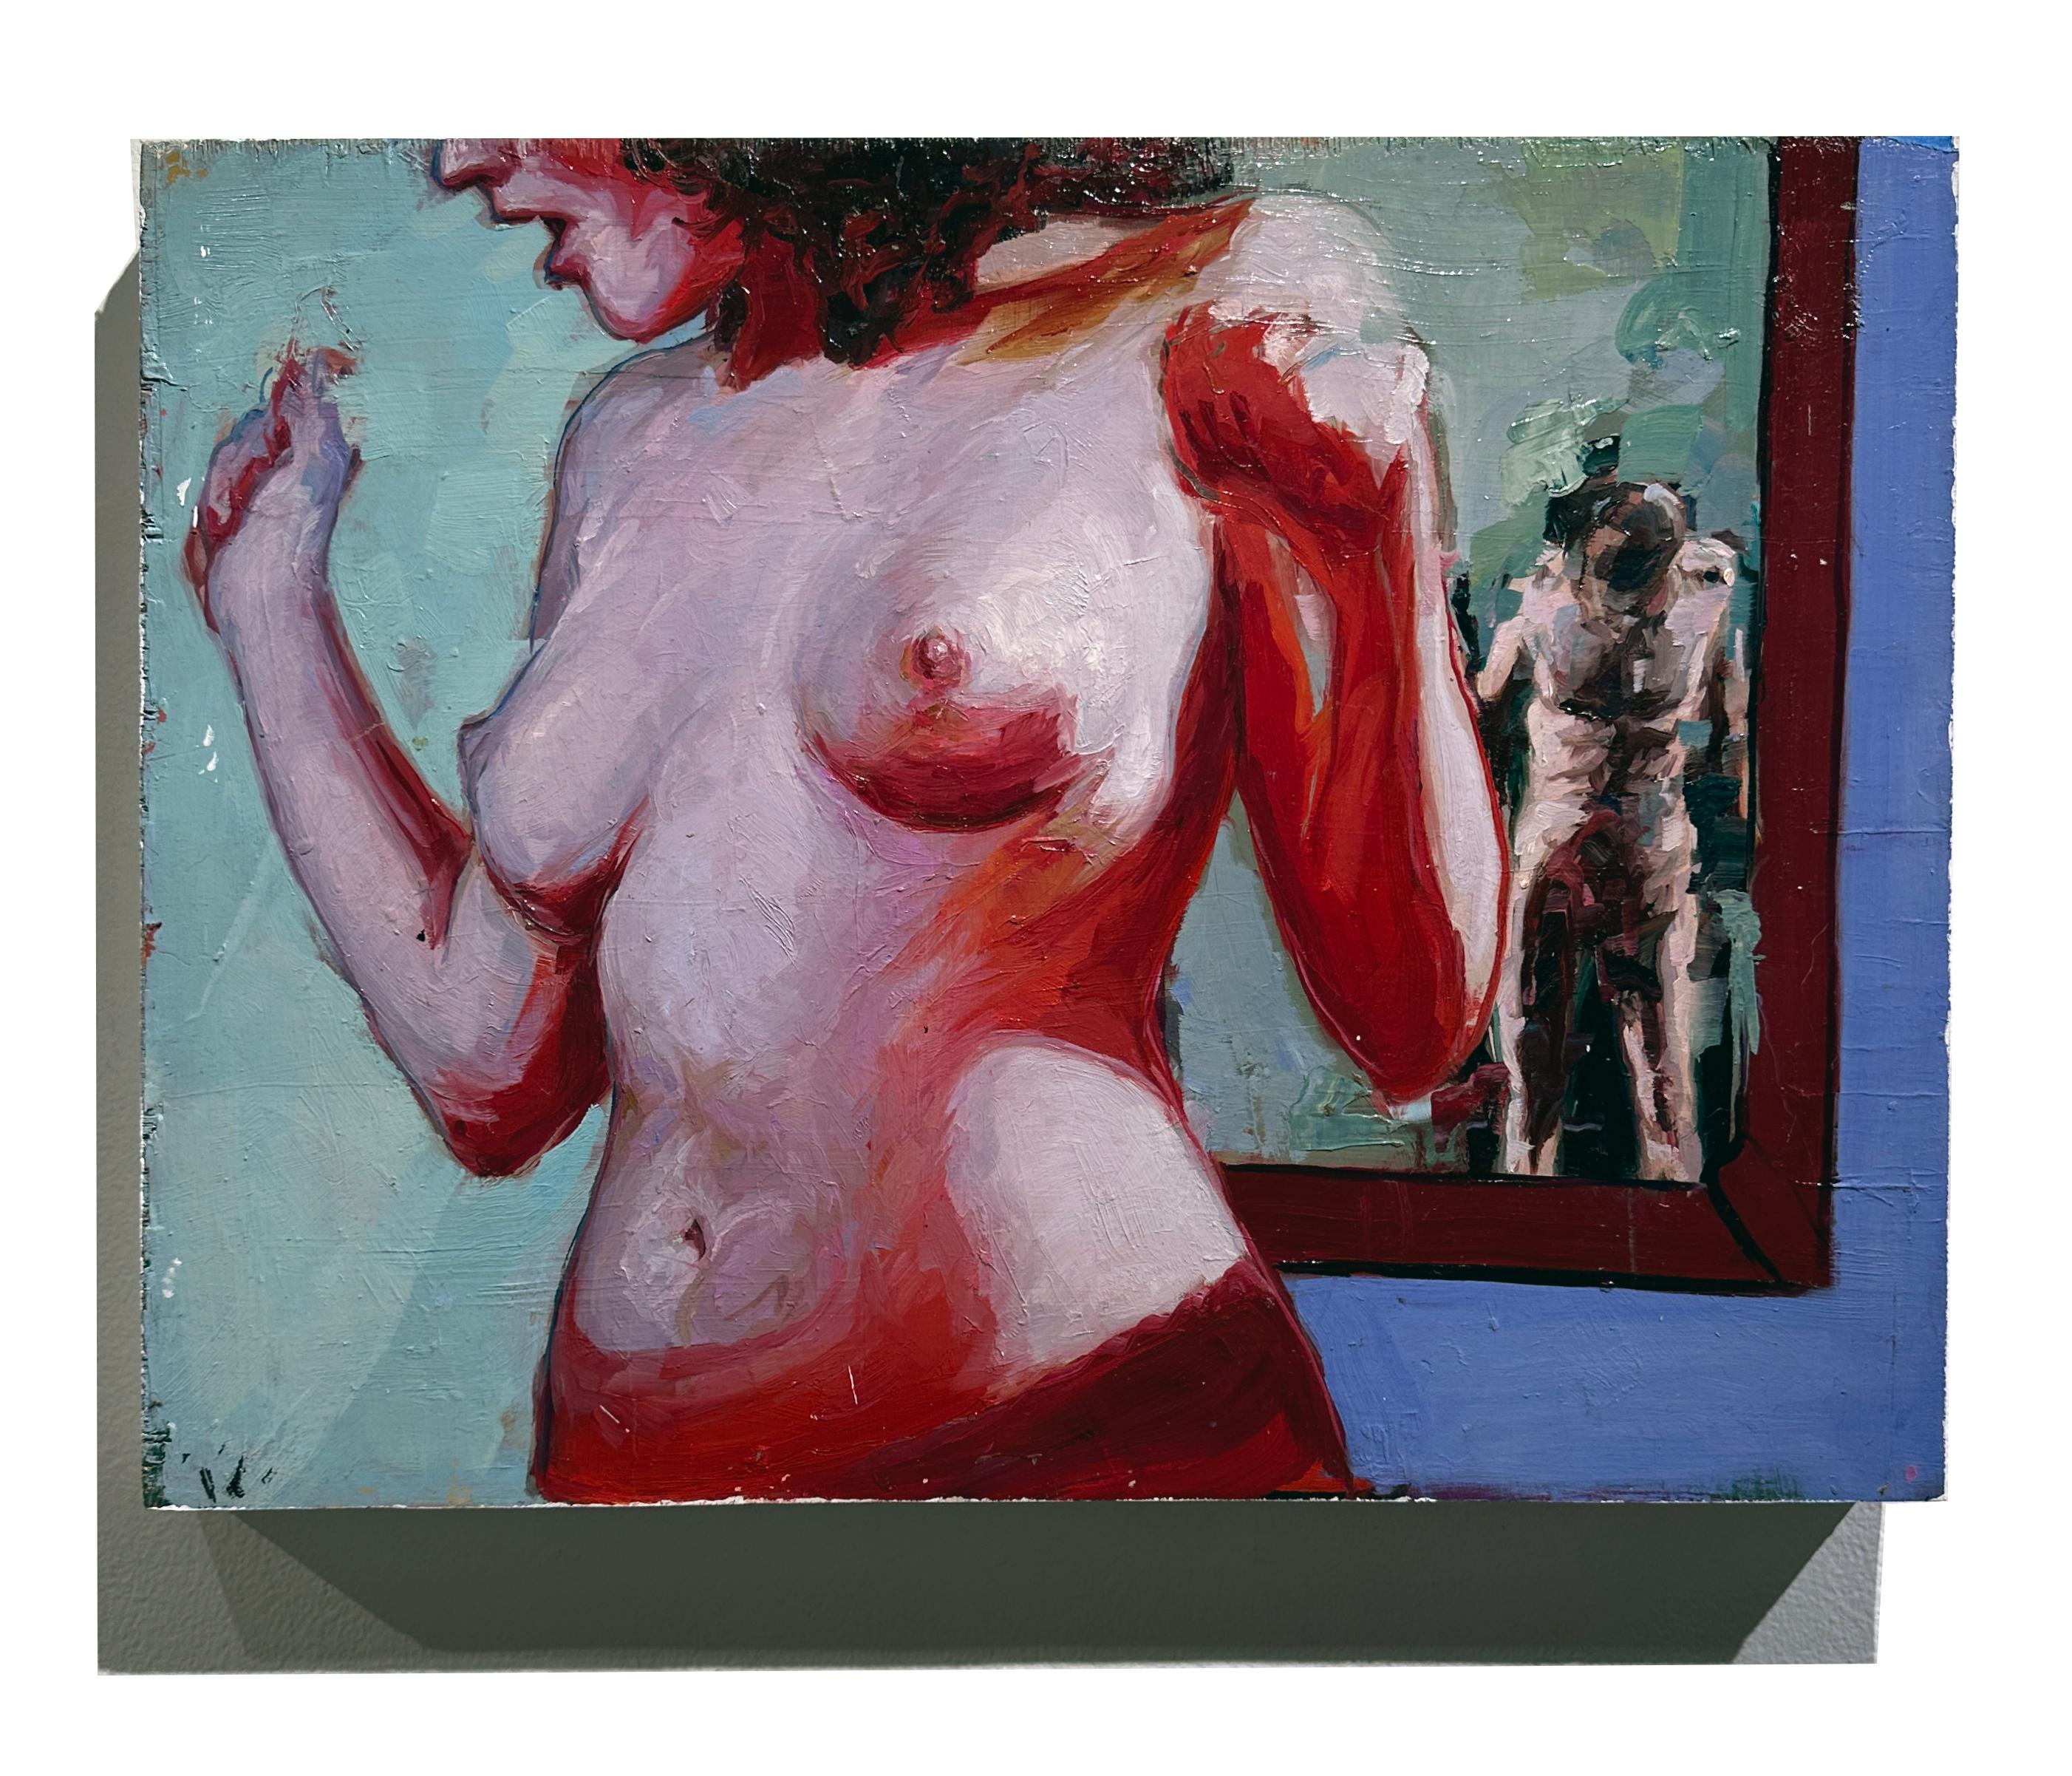 Bloody Birthday - Female Nude, Bold Colors and Heavy Textured Paint on Panel - Painting by Georgia Hinaris